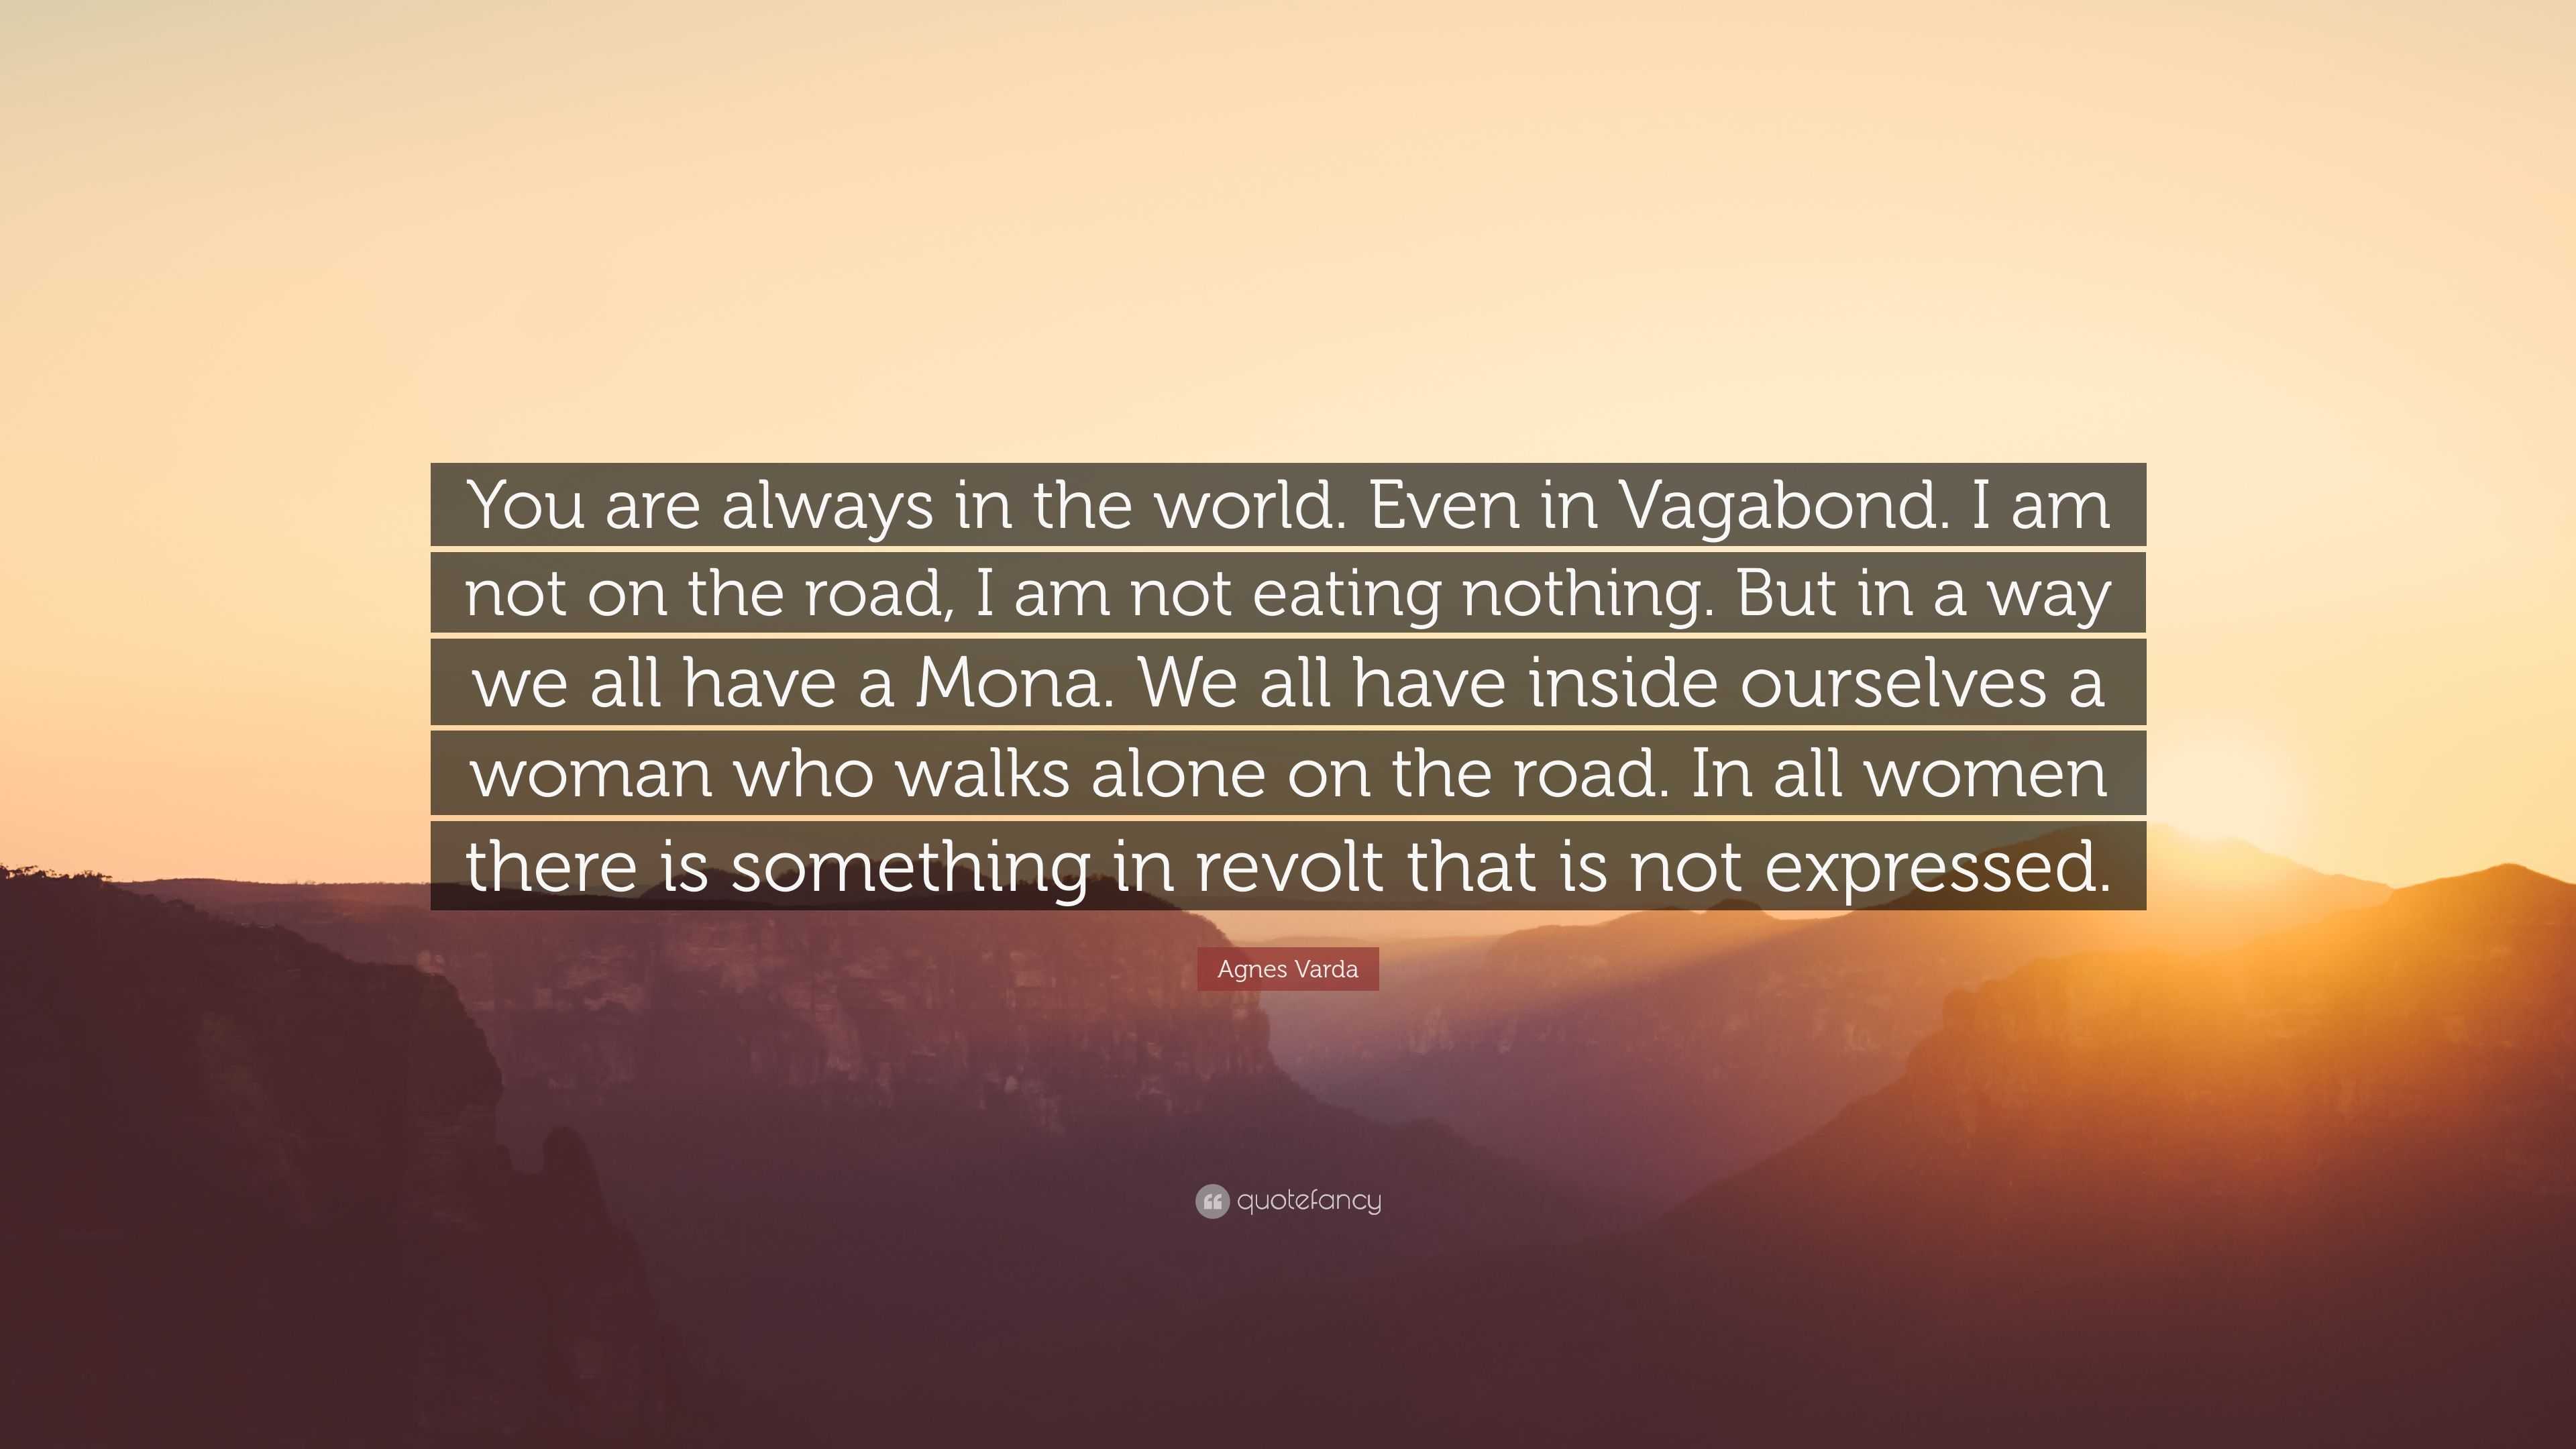 Agnes Varda Quote: “You are always in the world. Even in Vagabond. I am not on the road, I am not nothing. But in a way we all a...”